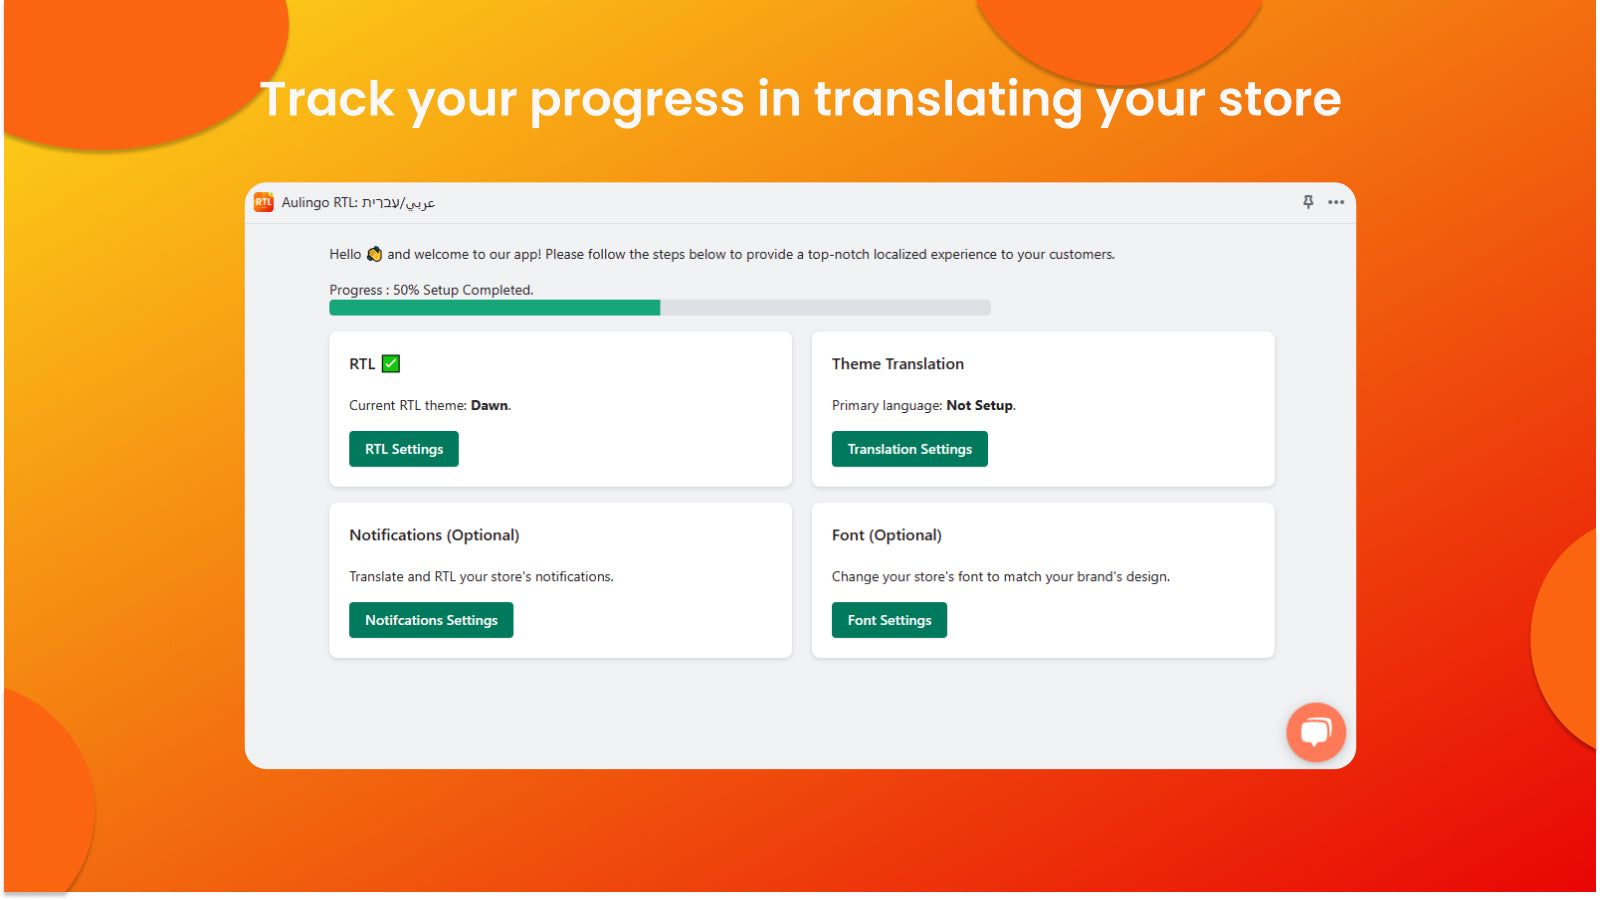 Track your progress in translating your store